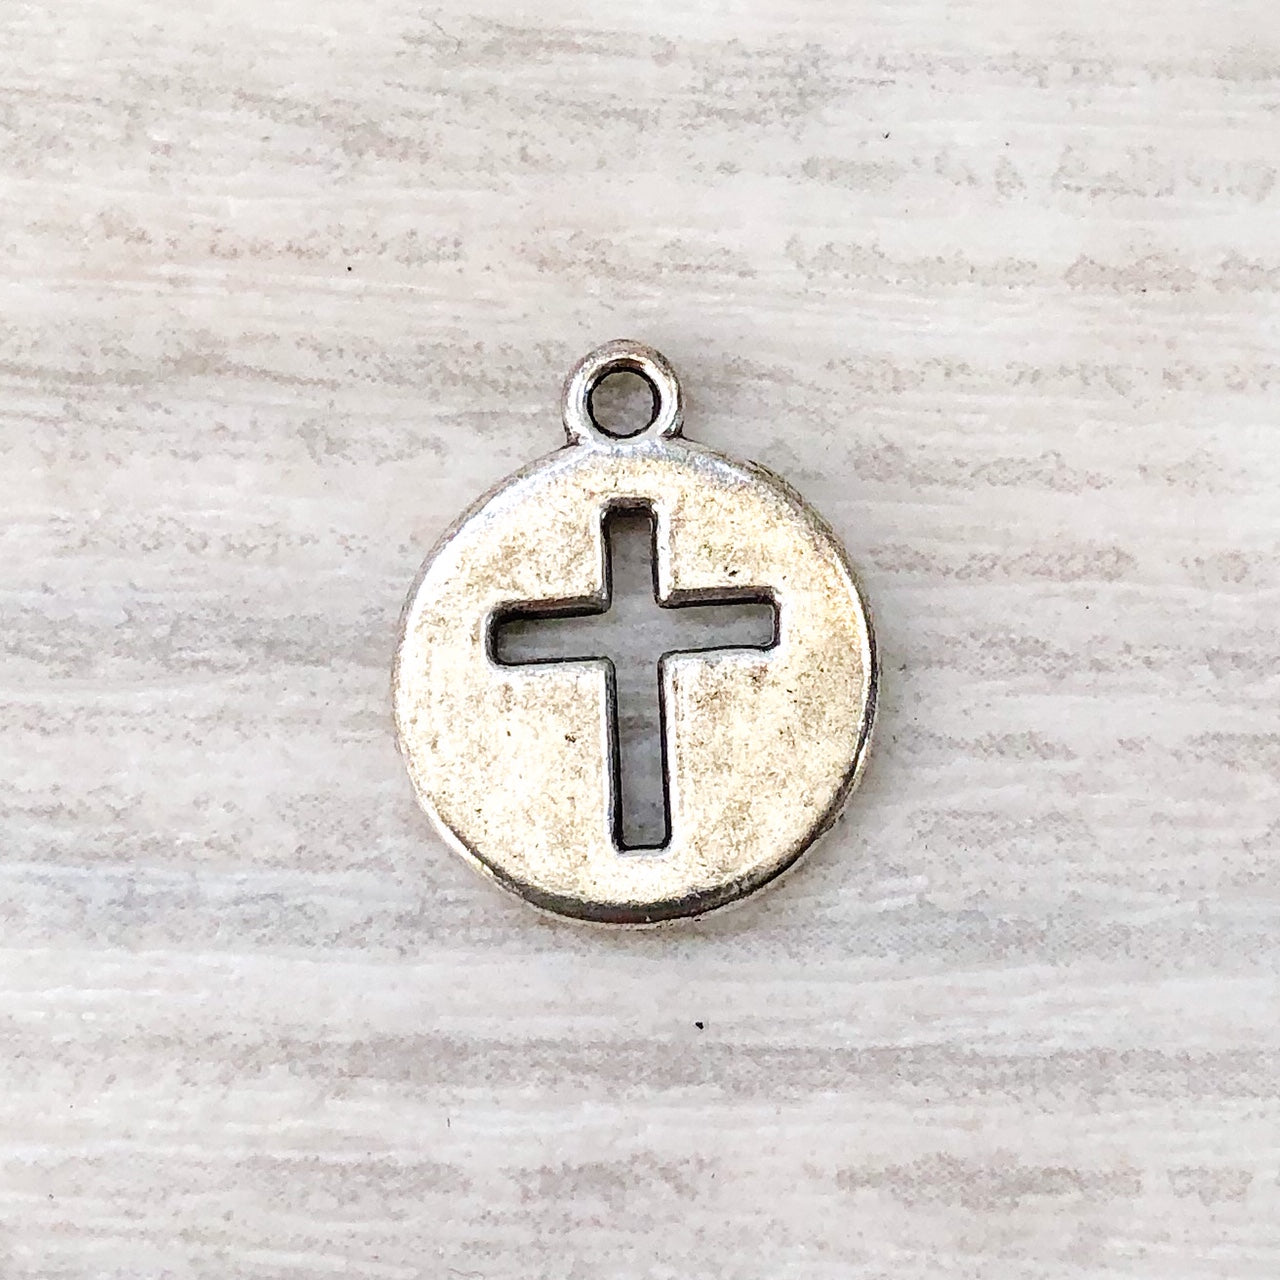 Add on Charm - Cross in a circle